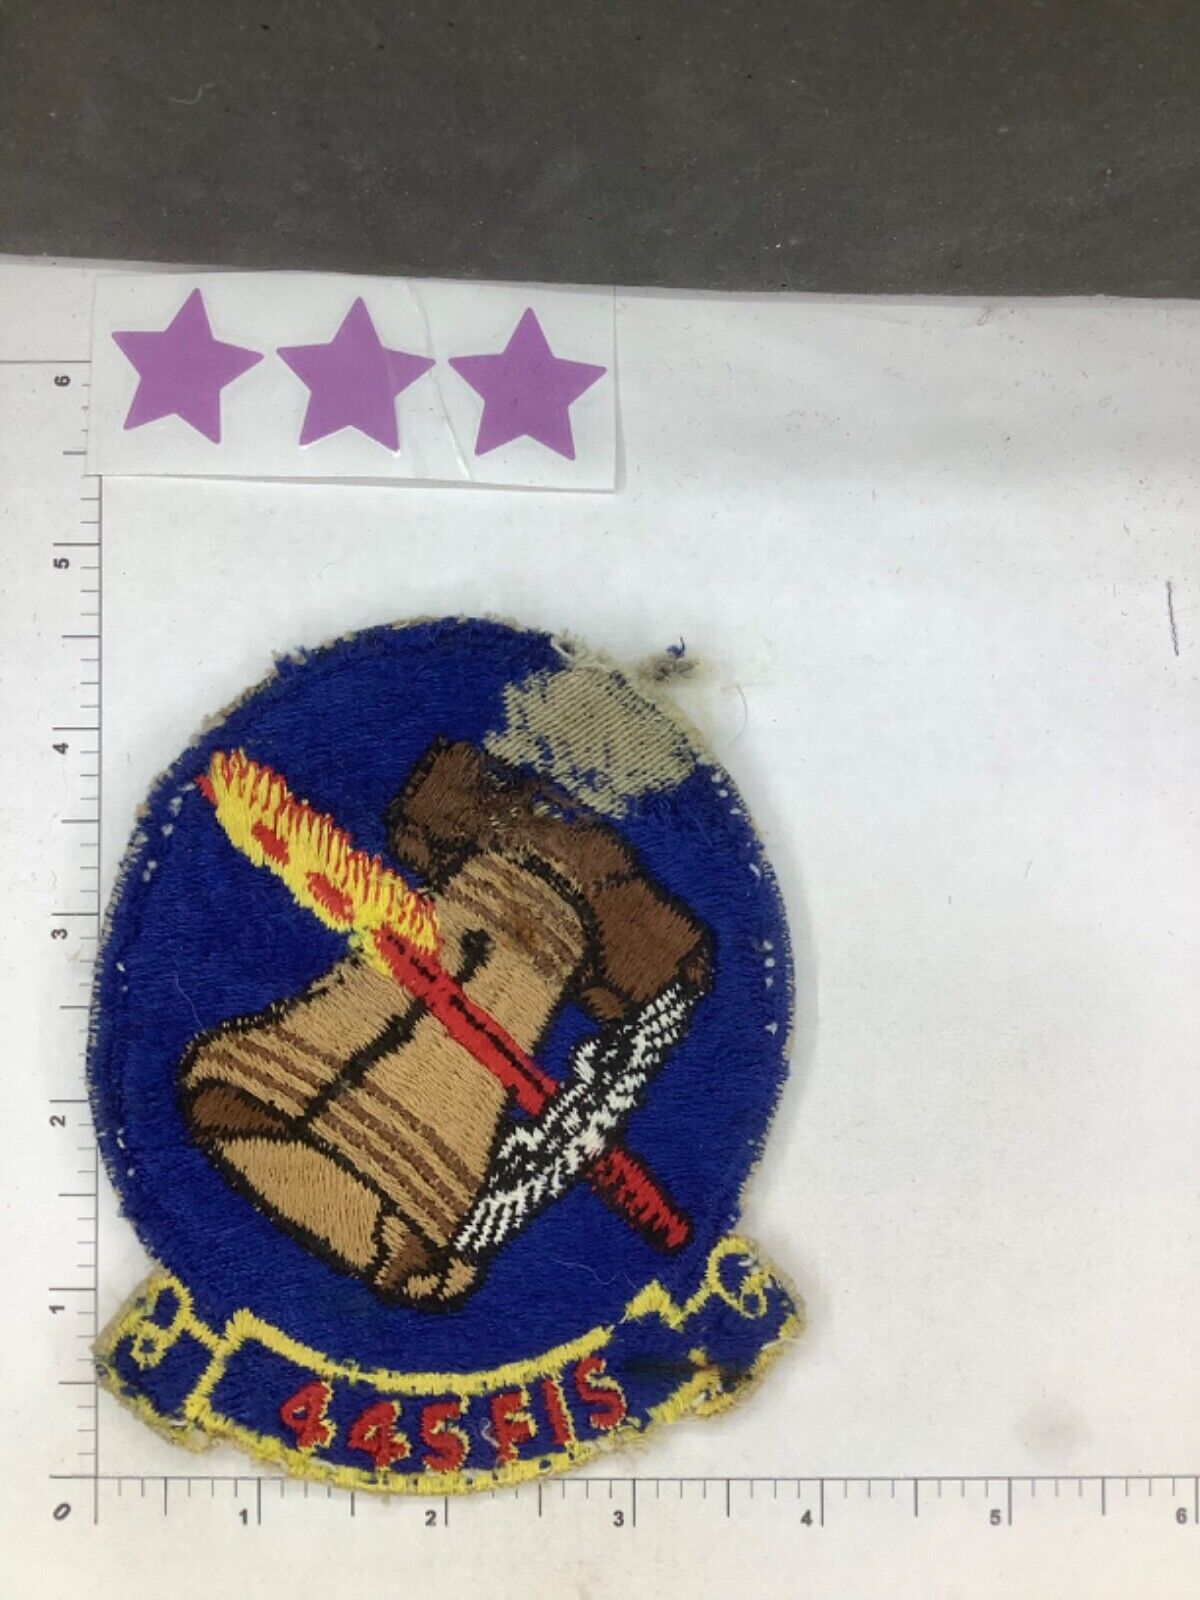 WELL WORN VINTAGE USAF 445th FIGHTER INTERCEPTOR SQUADRON PATCH